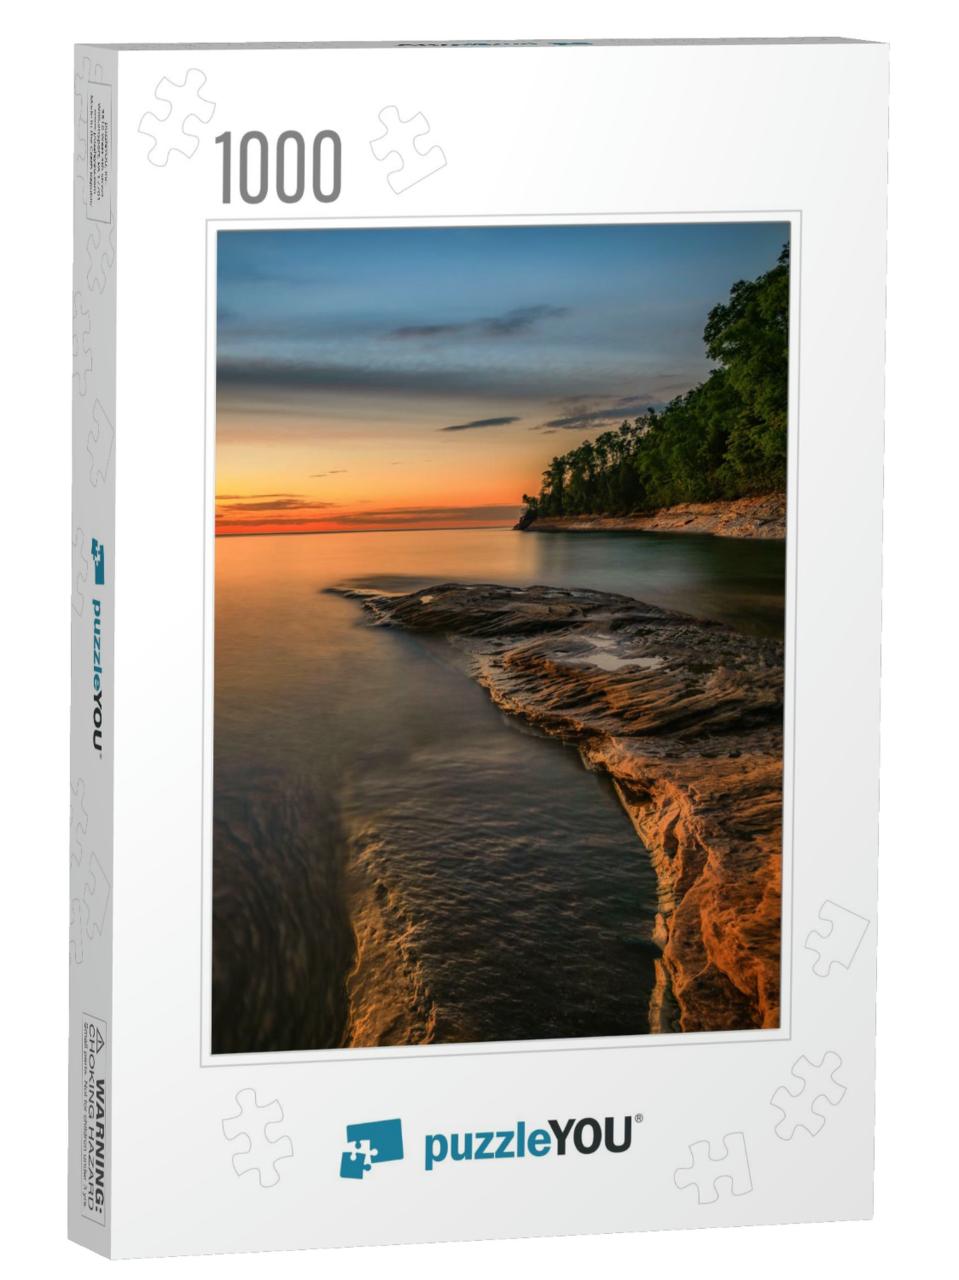 Twilight At Pictured Rocks Lake Superior, Lake Super... Jigsaw Puzzle with 1000 pieces